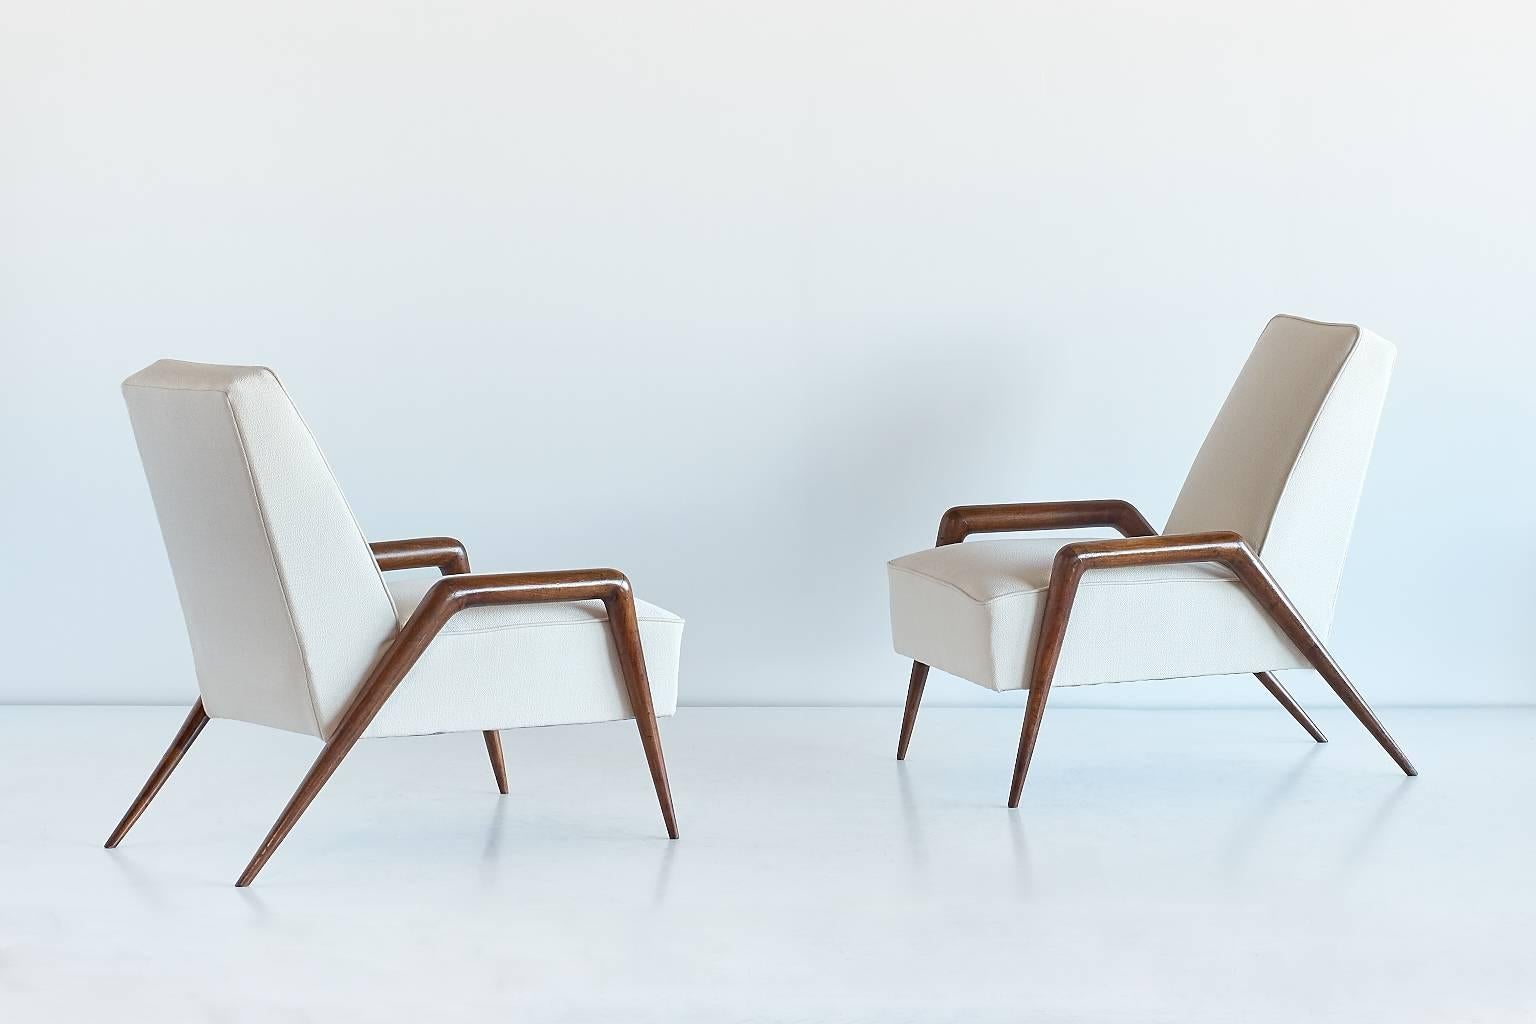 These striking armchairs were designed and custom-made by Tito Bassanesi Varisco for the private residence of the Zuffellato family in Milan. The solid walnut frames give the chairs a modern and highly original feel. The particularly graphical lines